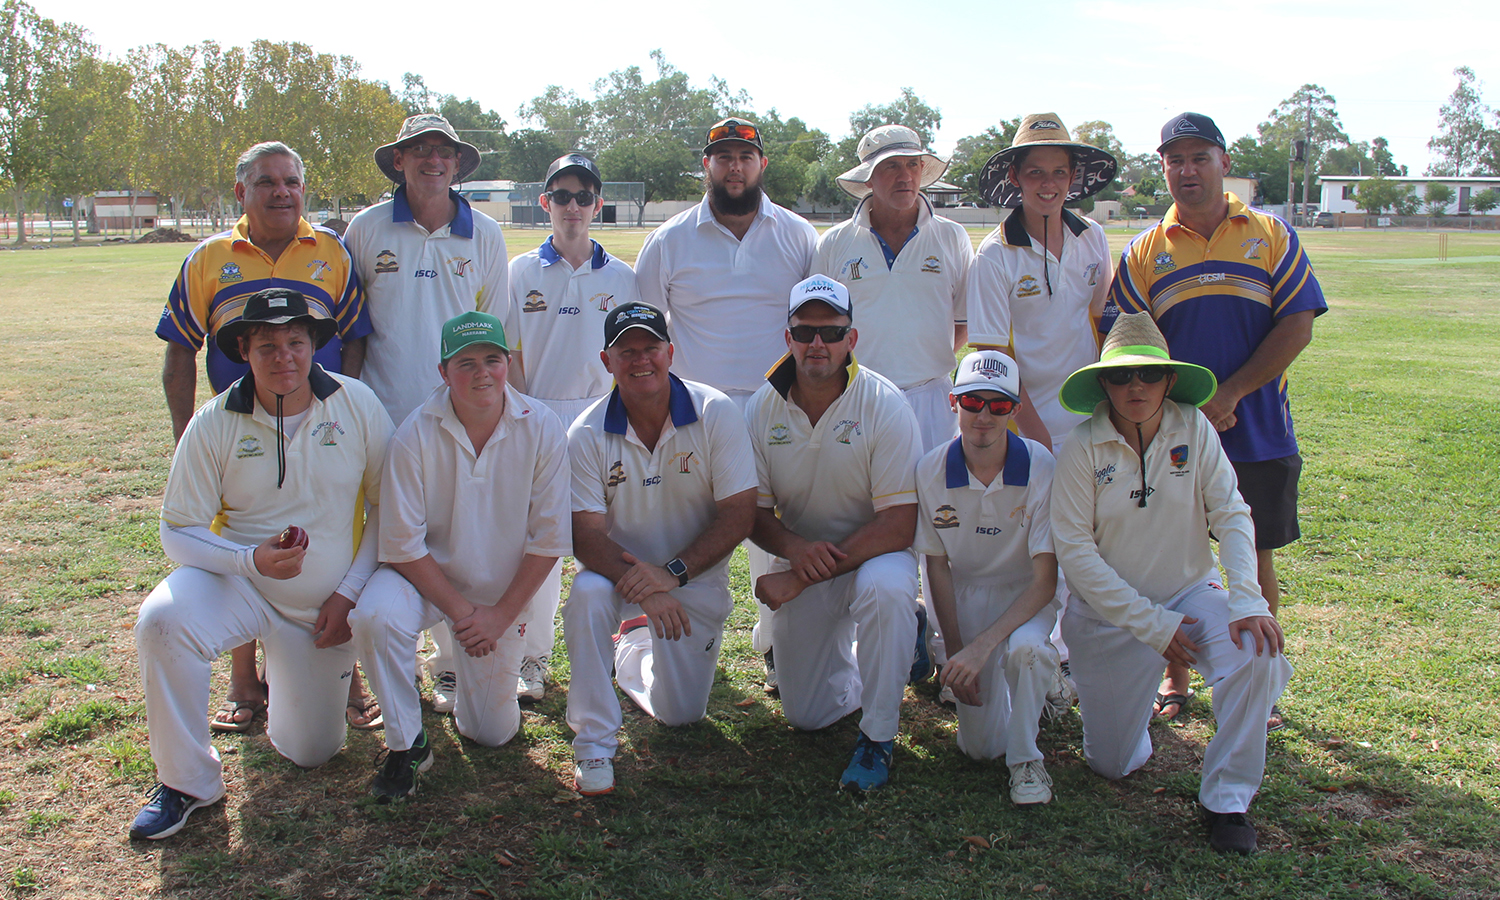 Second grade minor premiers finish on a high